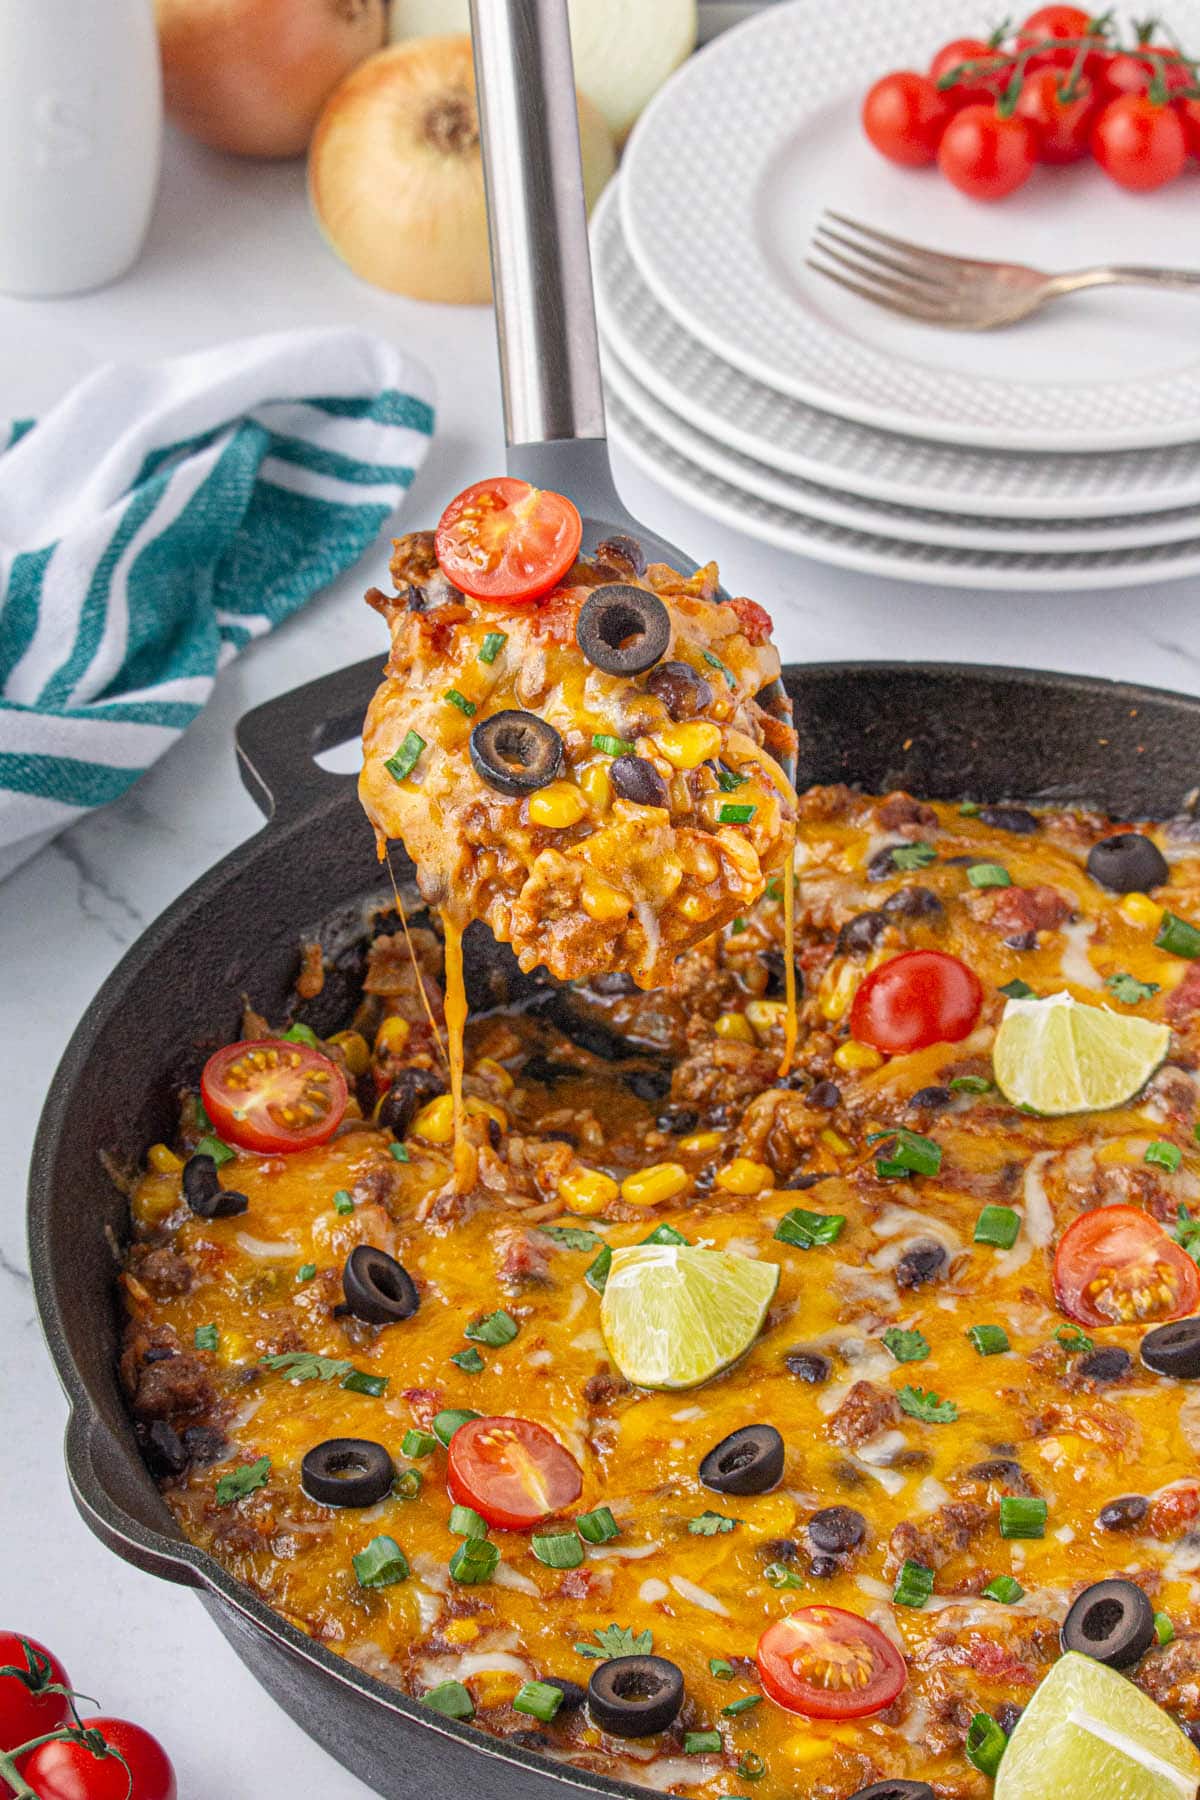 Cast iron skillet filled with Taco and Rice Casserole. With a serving spoon scooping up a serving.